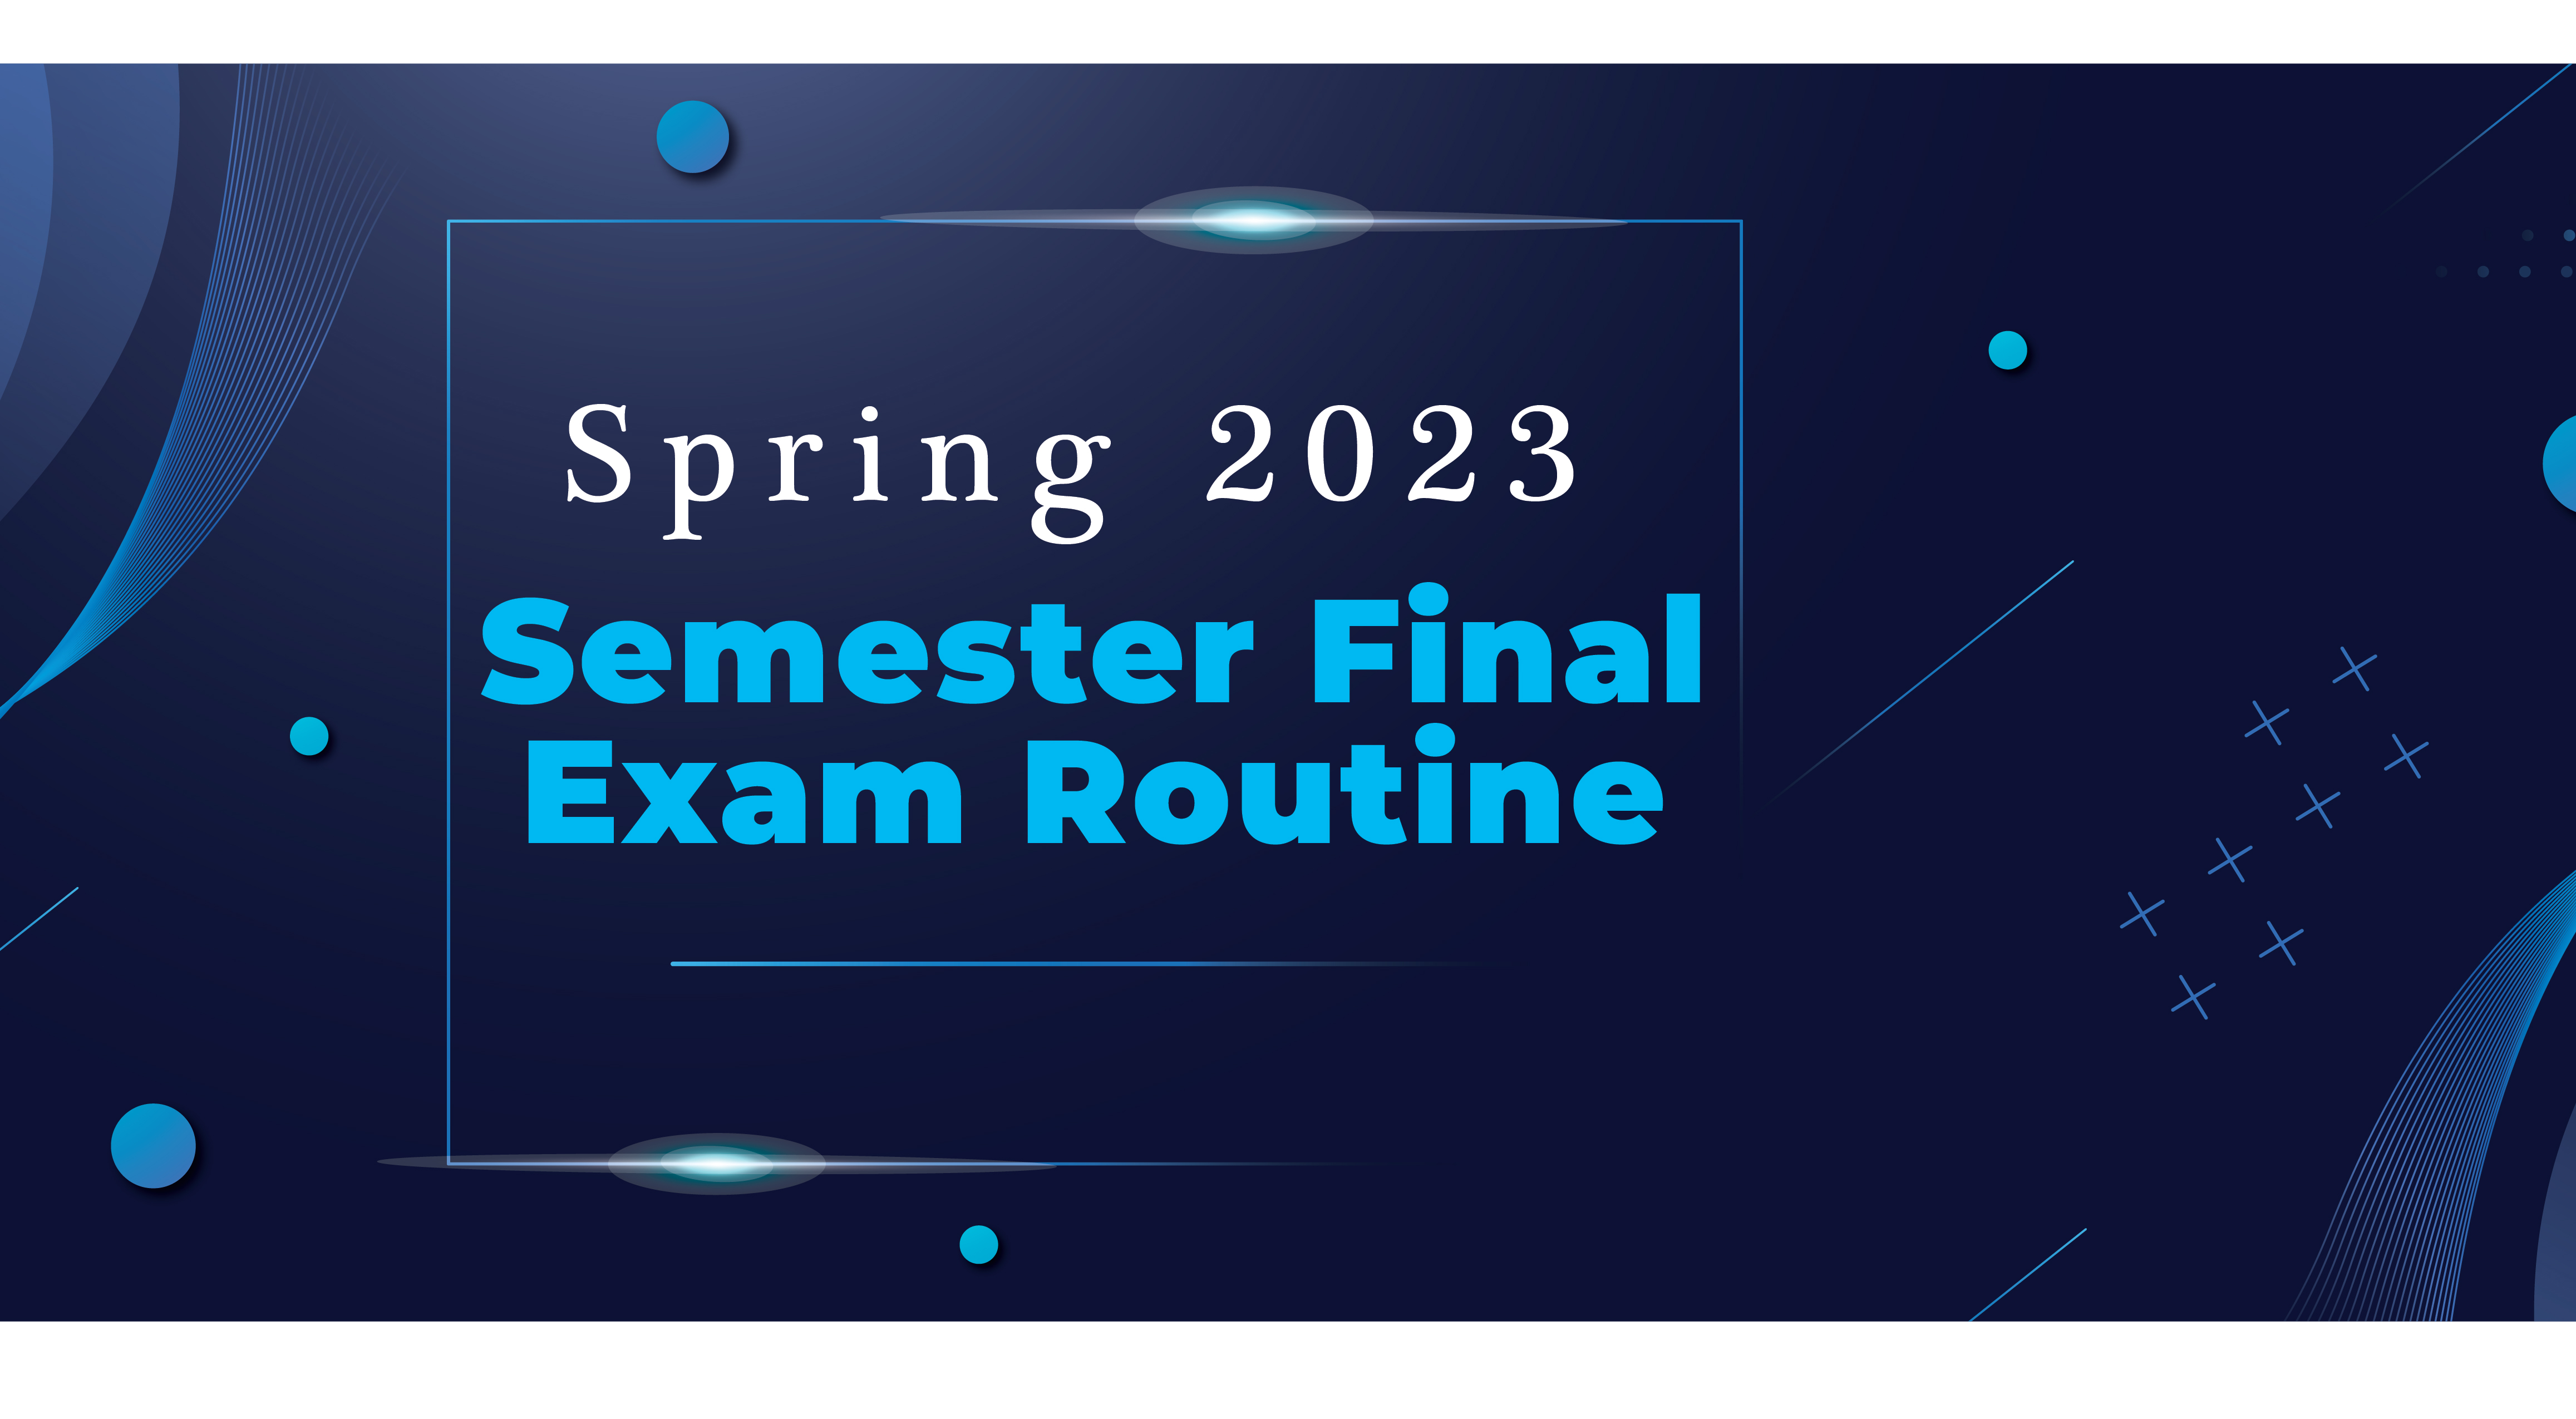 SPRING 2023 SEMESTER FINAL EXAM ROUTINE FOR EDUCATION & TRAINING